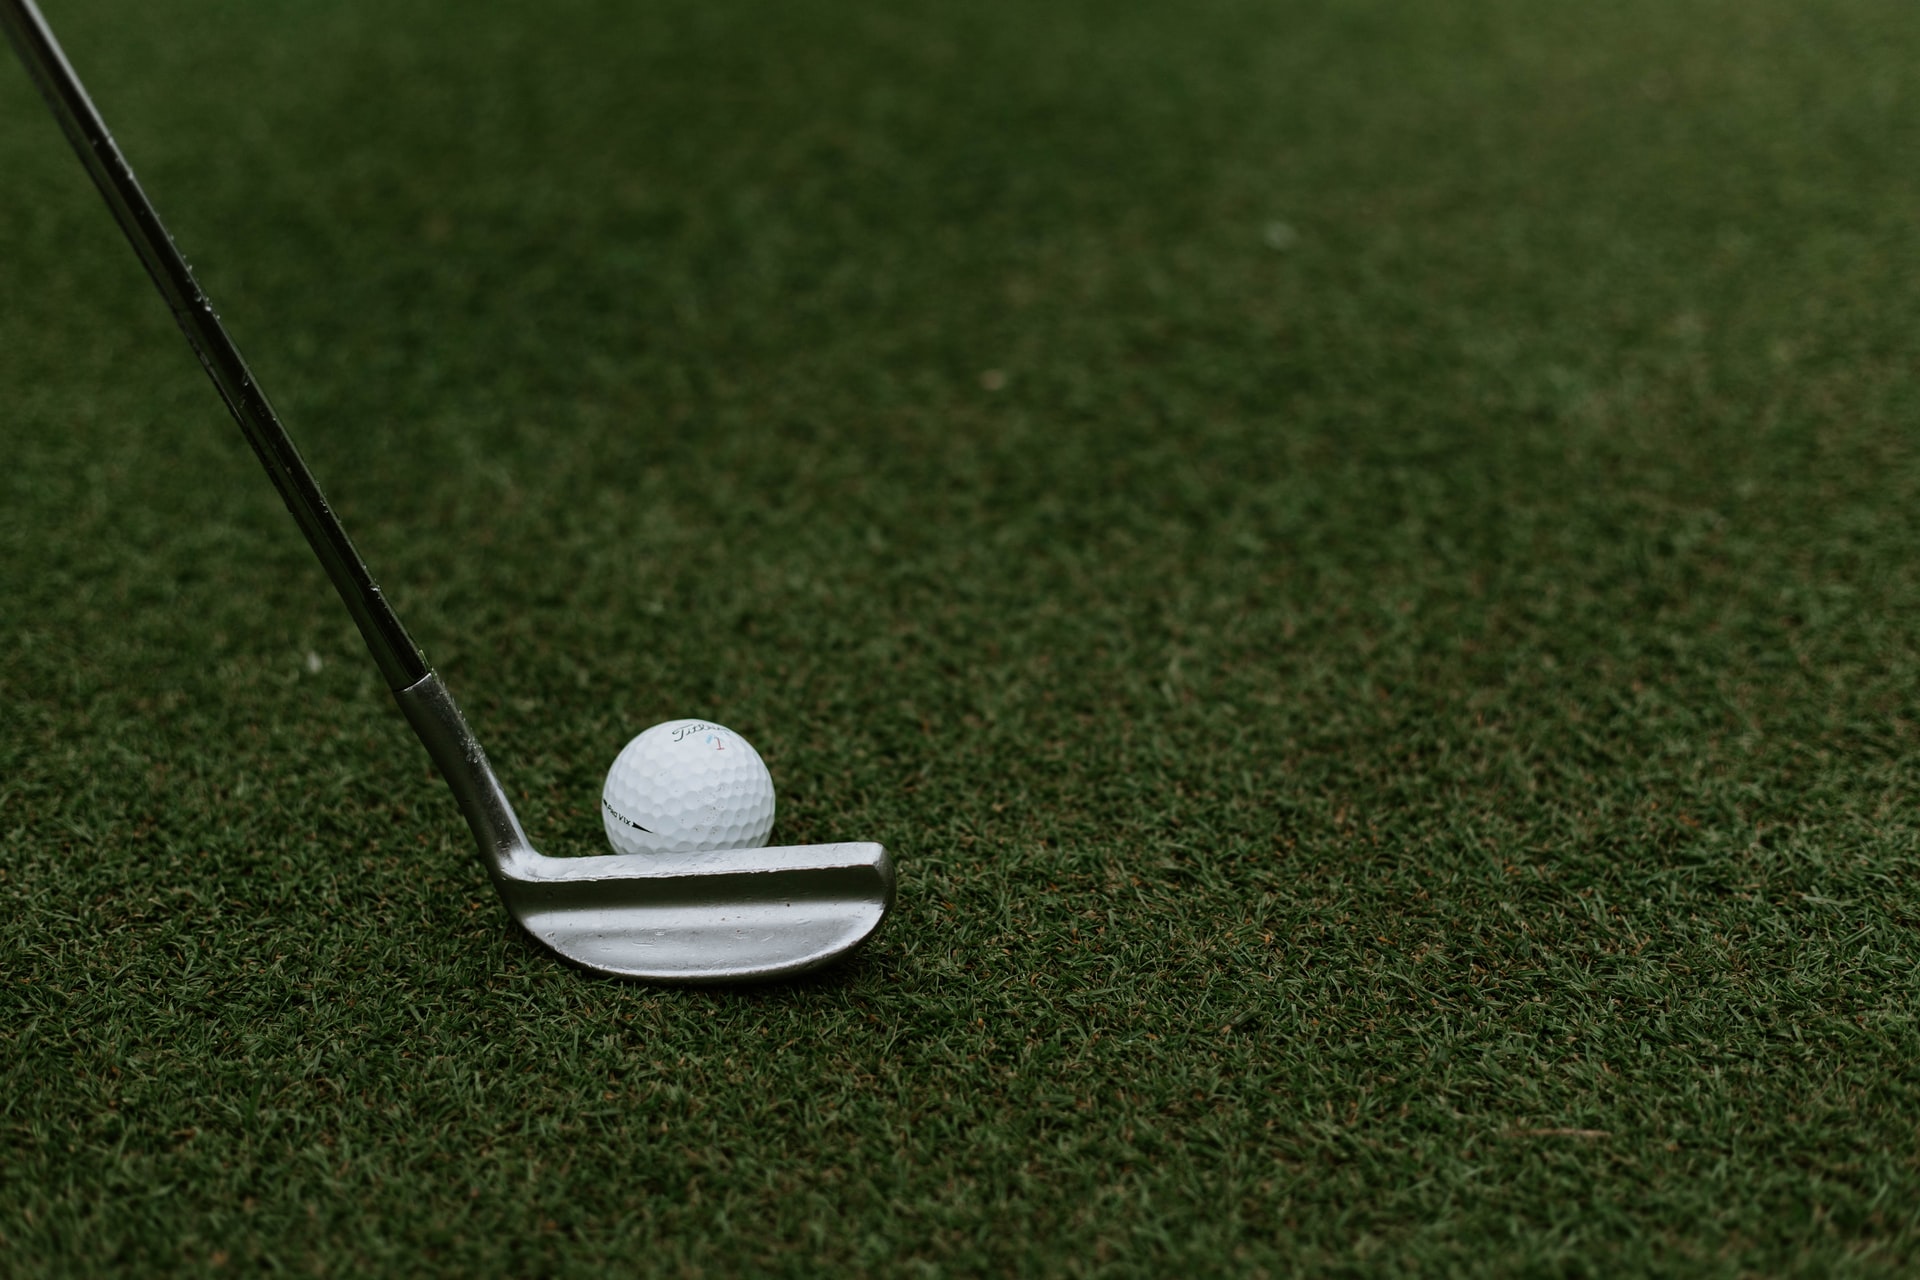 Close-up image of a golf club and ball at a sports facility